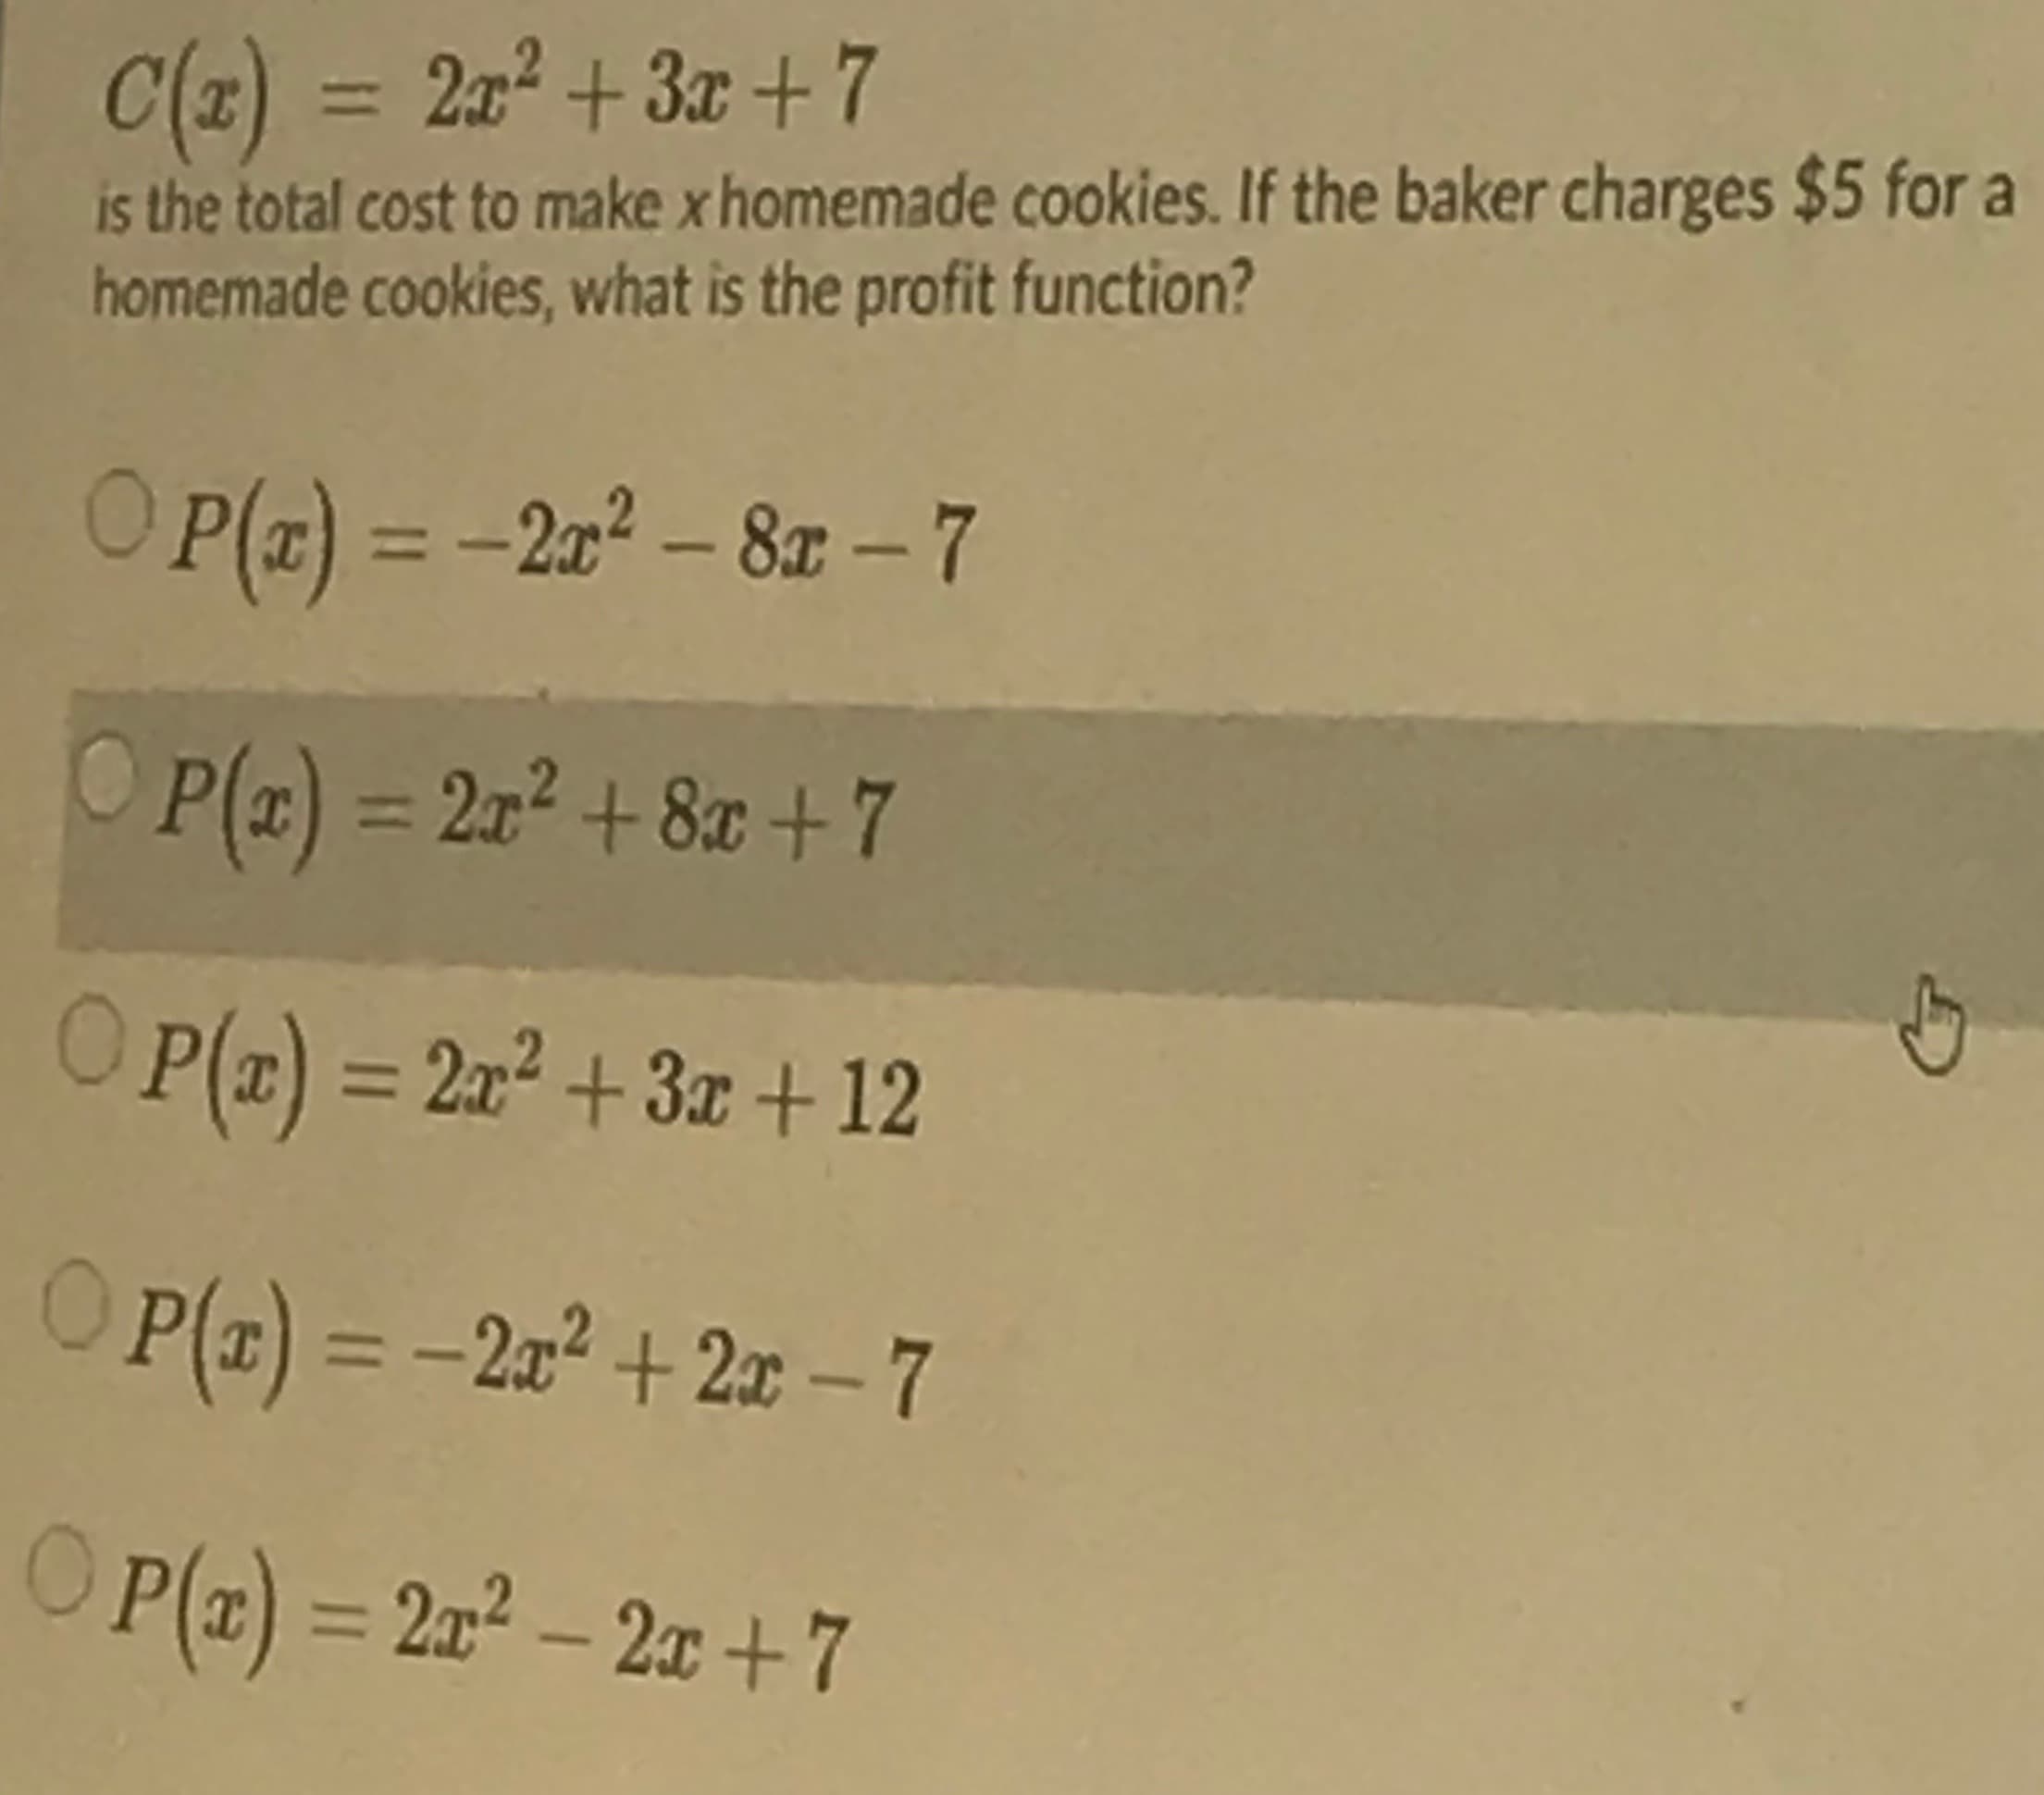 = 20 + 3x + 7
C(z)
s the total cost to make x homemade cookies. If the baker
homemade cookies, what is the profit function?
